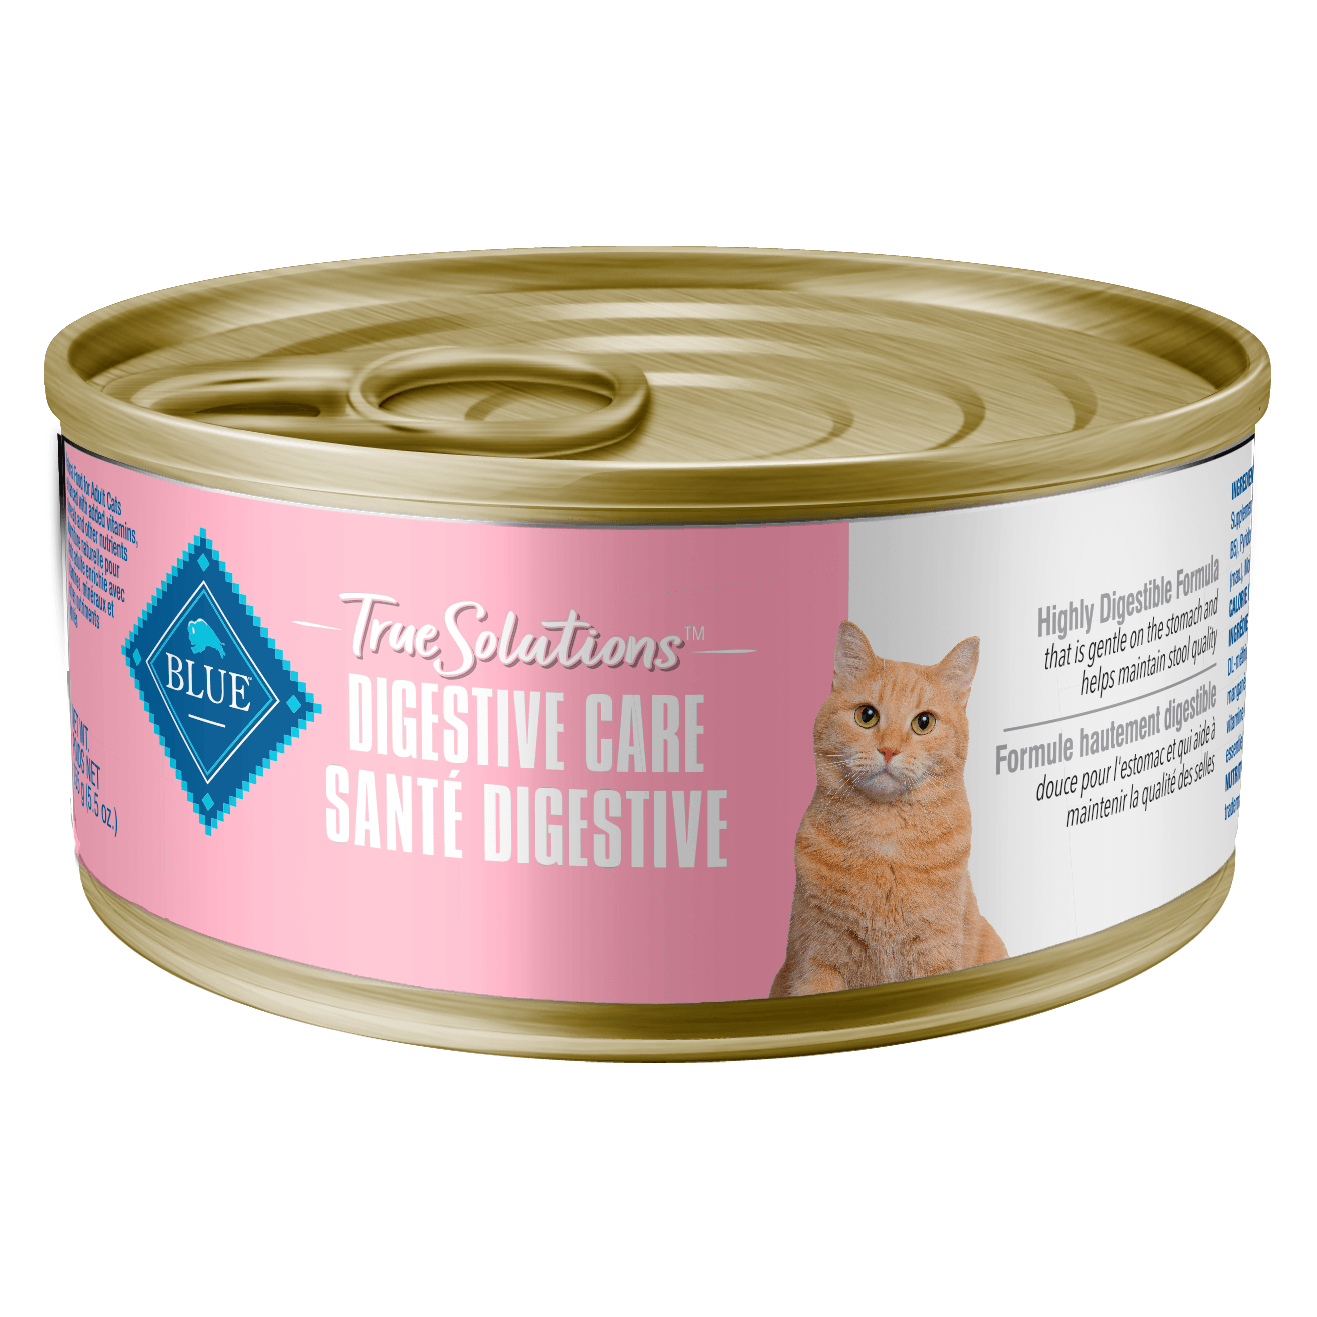 Blue True Solutions Canned Cat Food Digestive Care 156g Canned Cat Food 156g | PetMax Canada